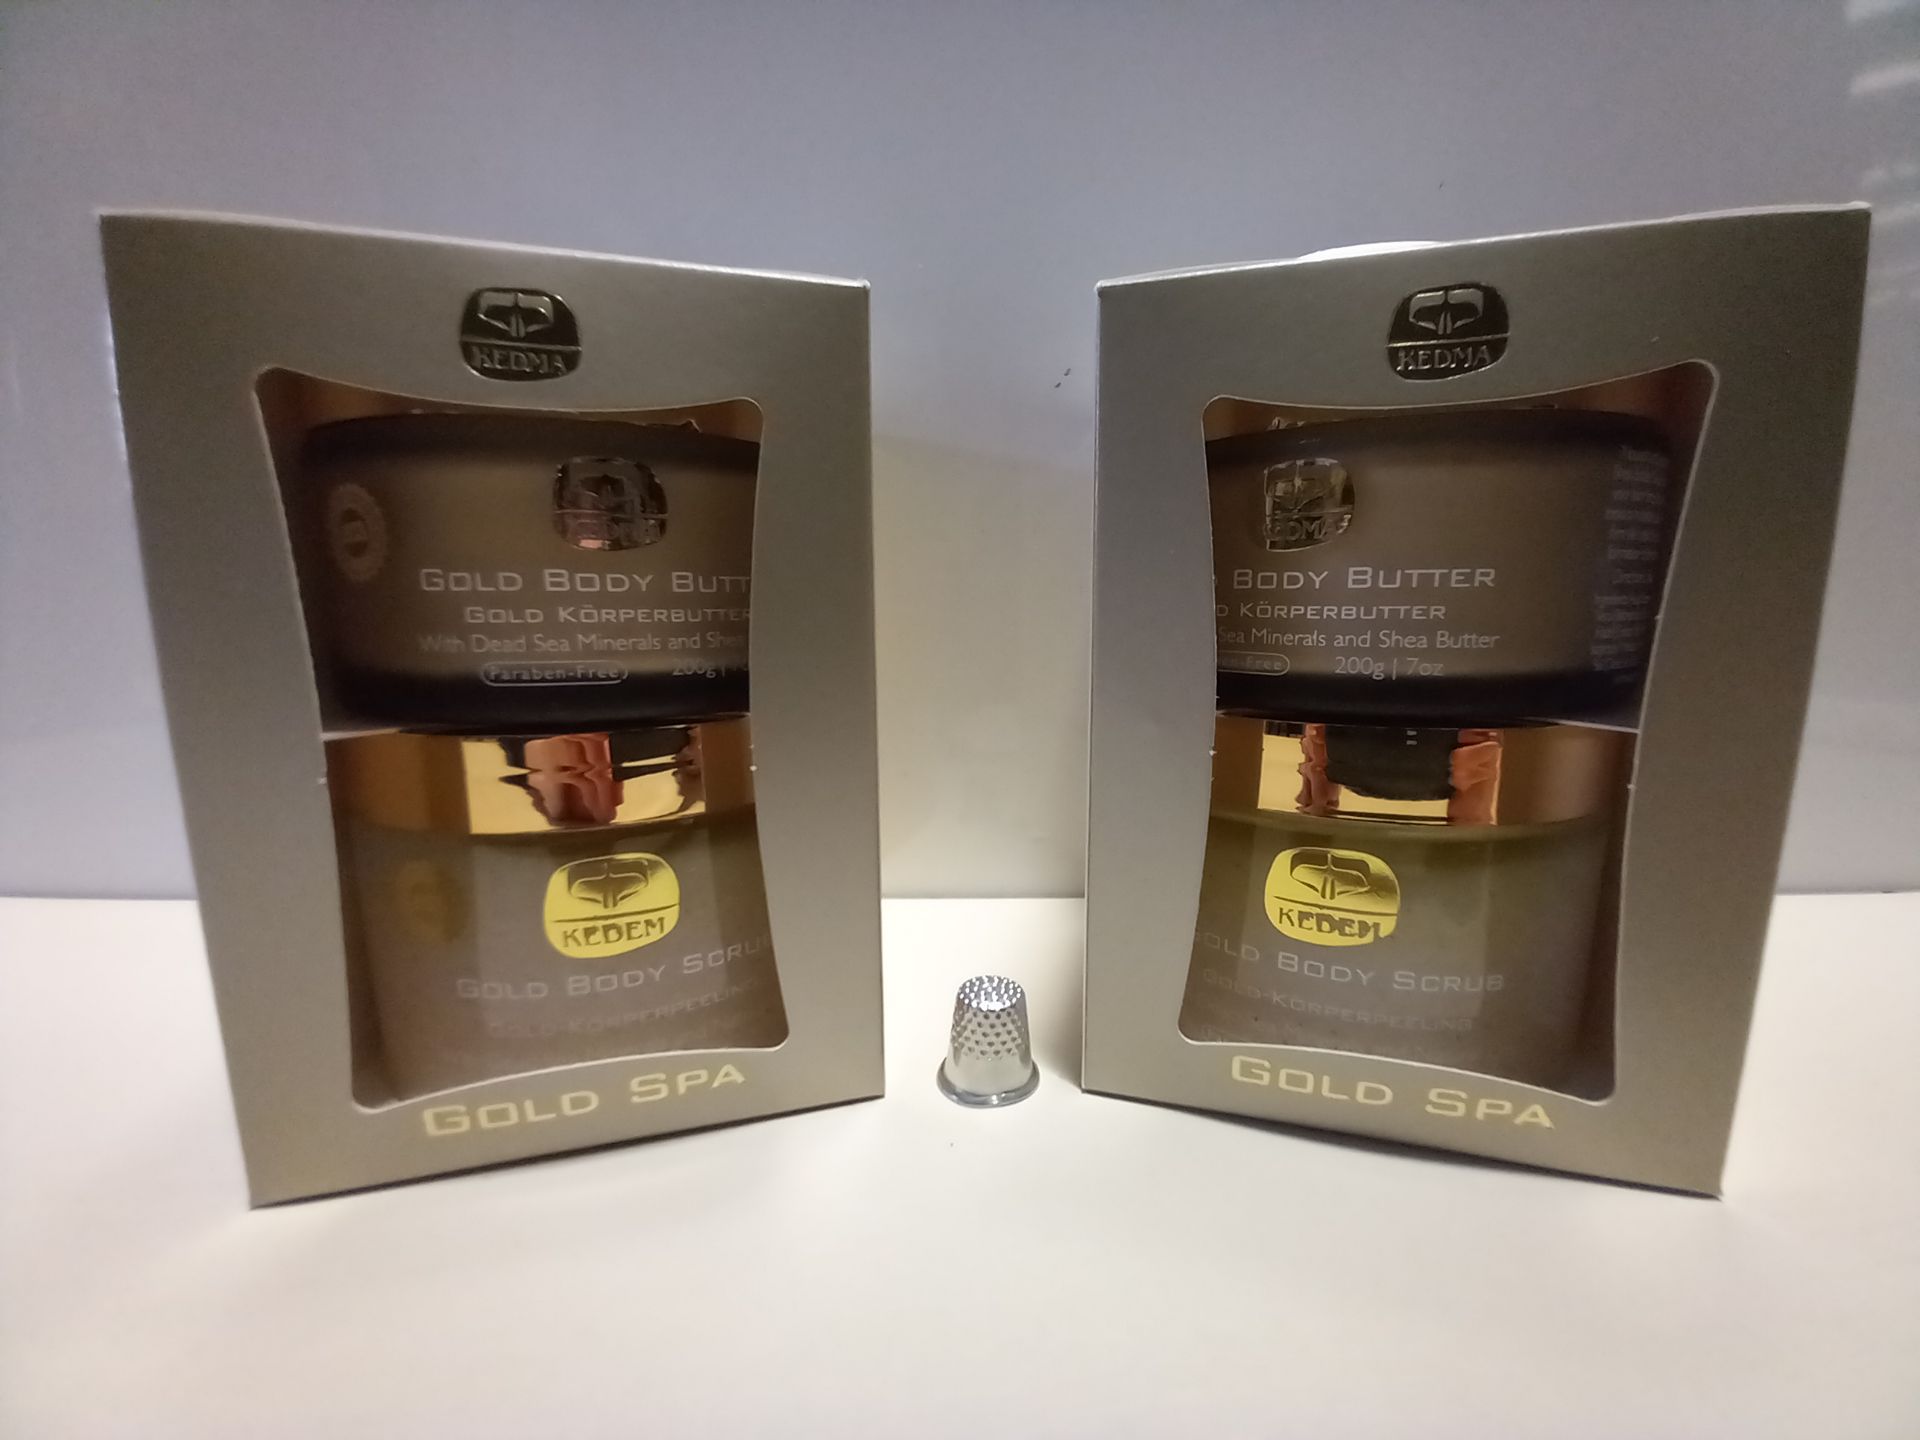 4 X BRAND NEW KEDMA GOLD SPA SET CONTAINING 200G GOLD BODY BUTTER WITH DEAD SEA MINERALS AND SHEA